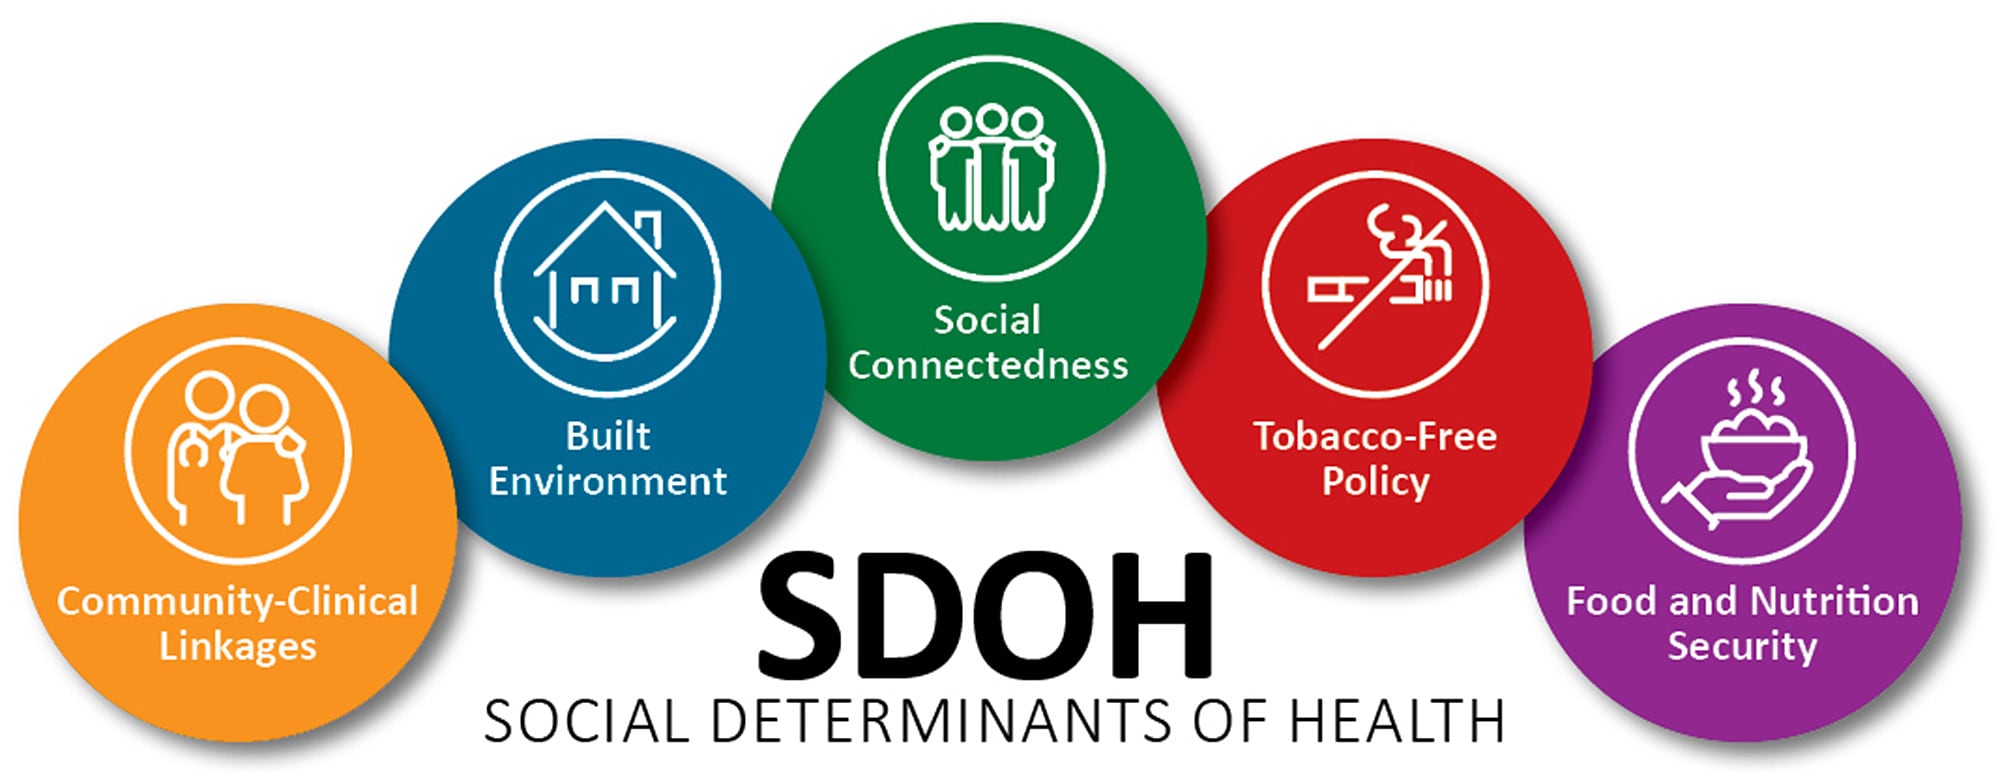 Graphic of 5 SDOH: Community-Clinical Linkages, Built Environment, Social Connectedness, {ADD second c in tobacco}Tobacco-Free Policy, and Food and Nutrition Security.